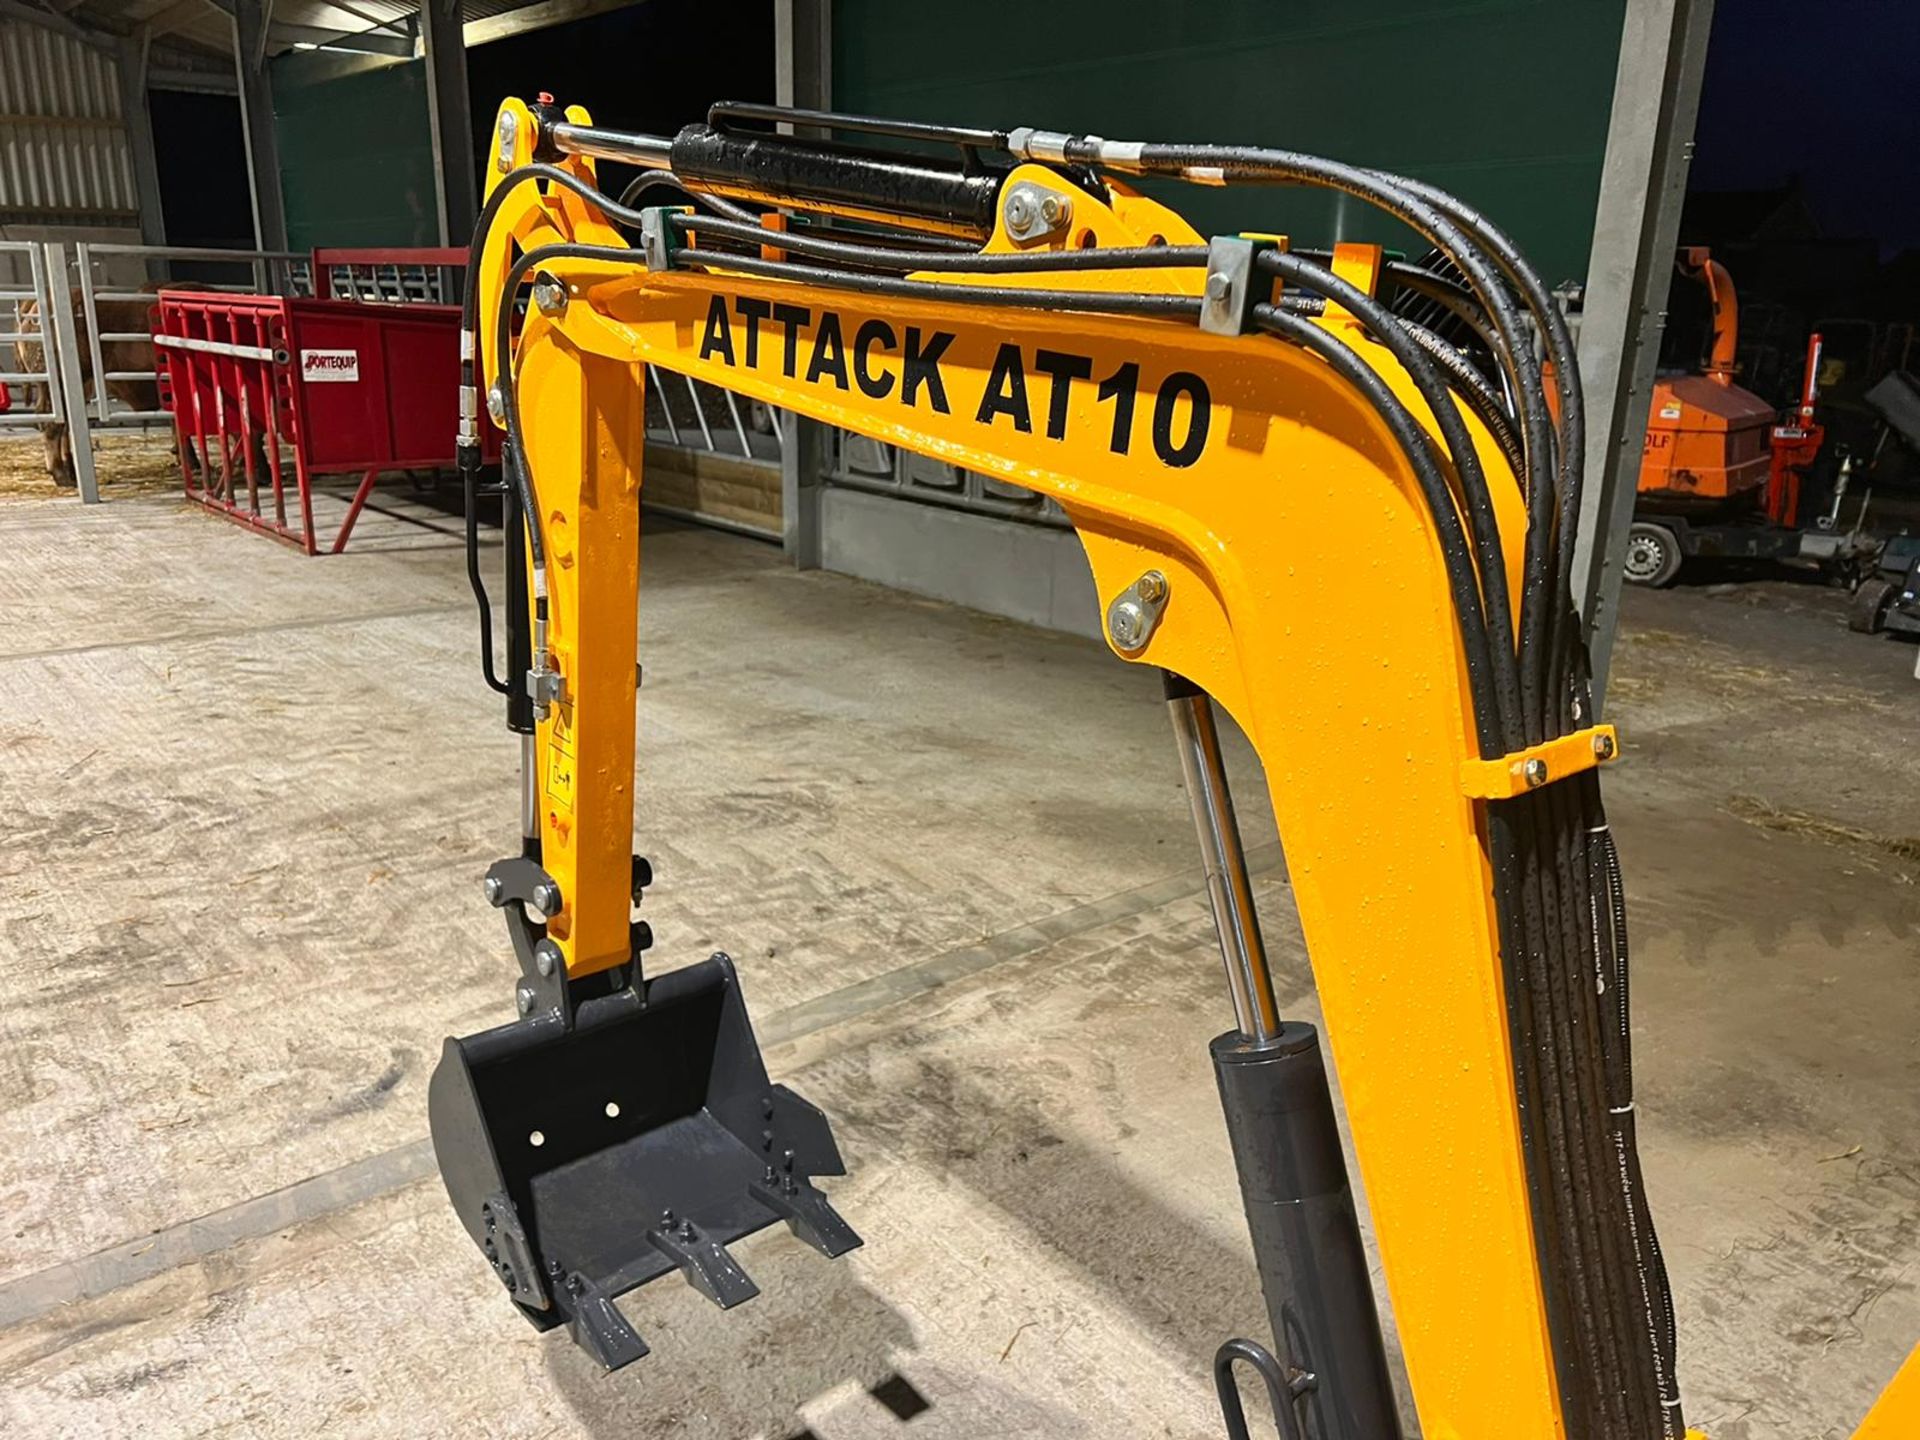 NEW AND UNUSED ATTACK AT10 1 TON DIESEL MINI DIGGER, RUNS DRIVES AND DIGS, CANOPY *PLUS VAT* - Image 11 of 14